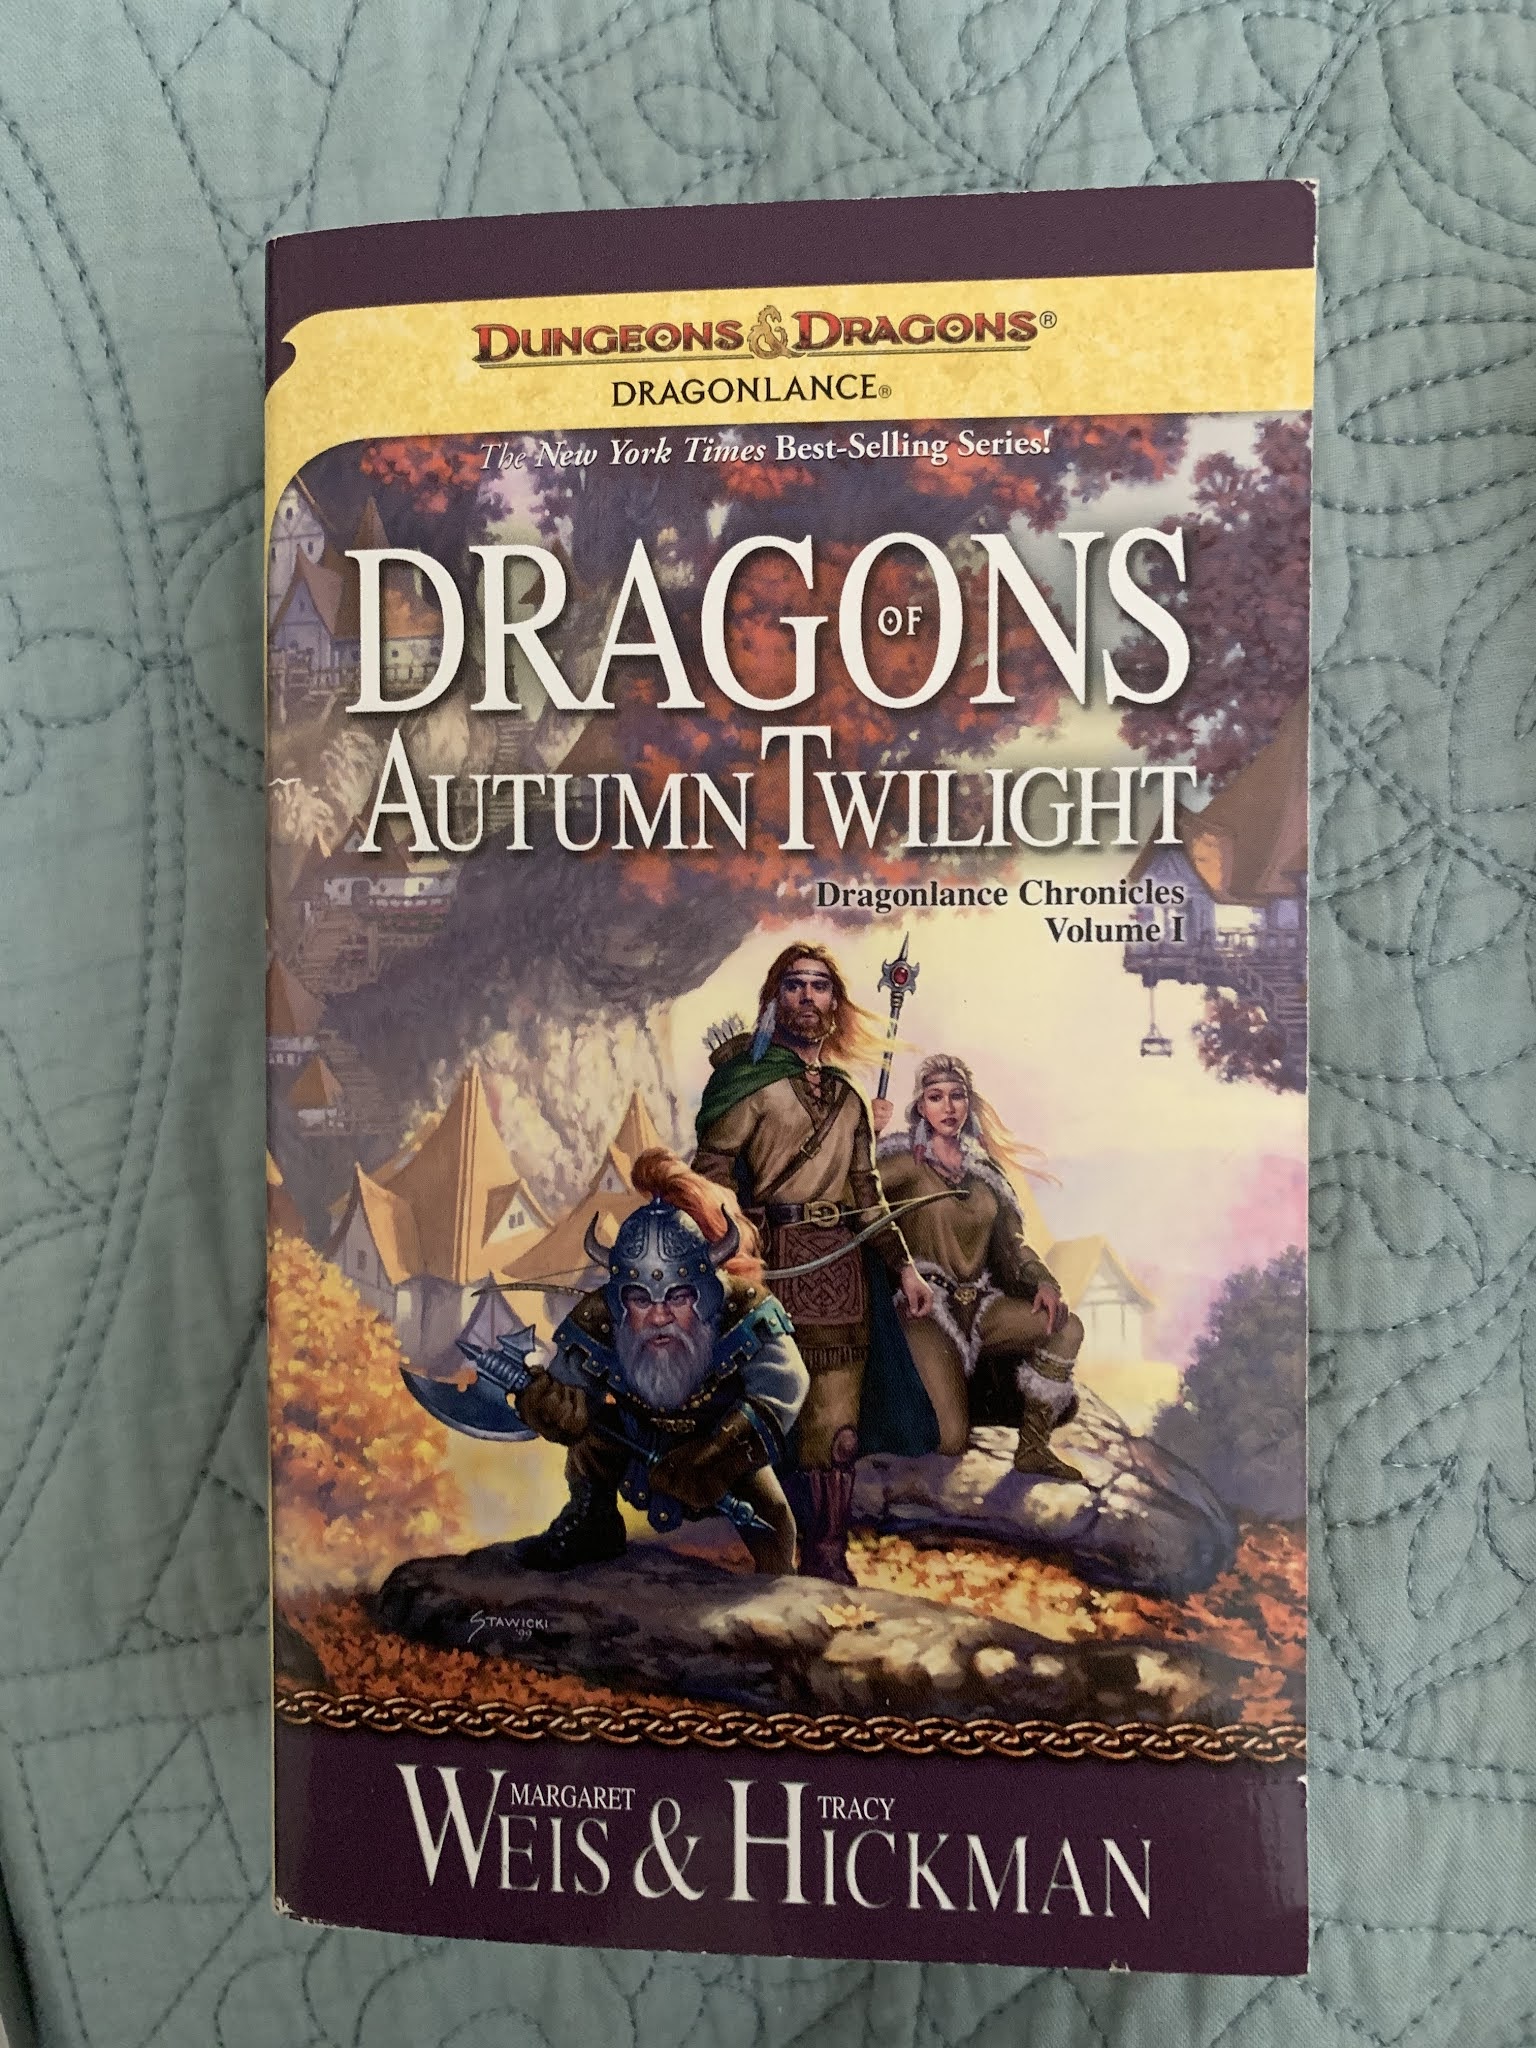 dragons of autumn twilight book review